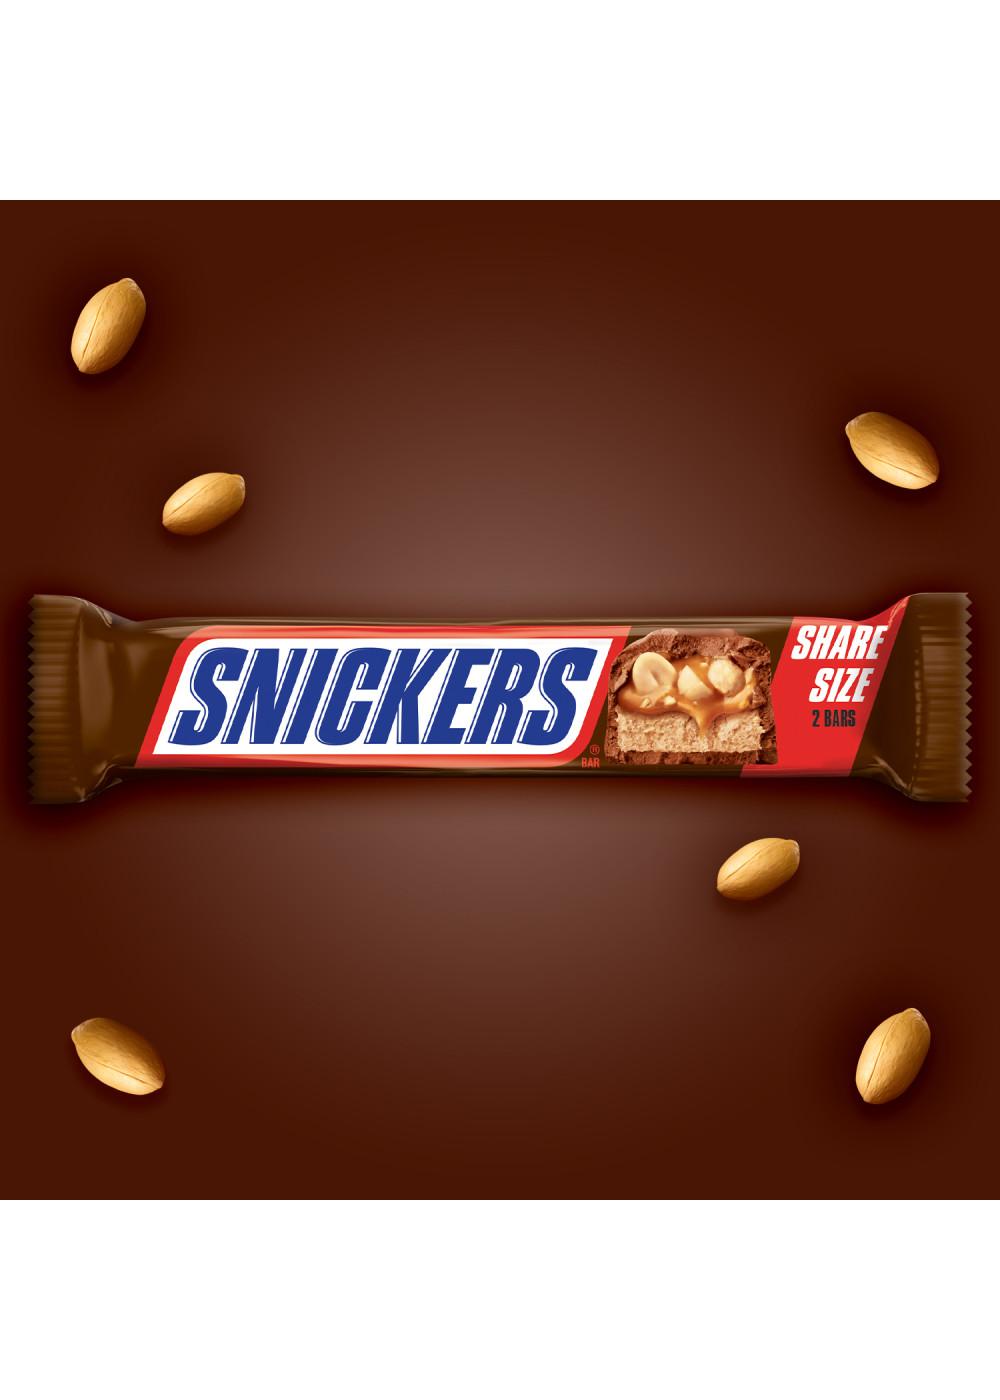 Snickers Milk Chocolate Candy Bar - Share Size; image 5 of 8